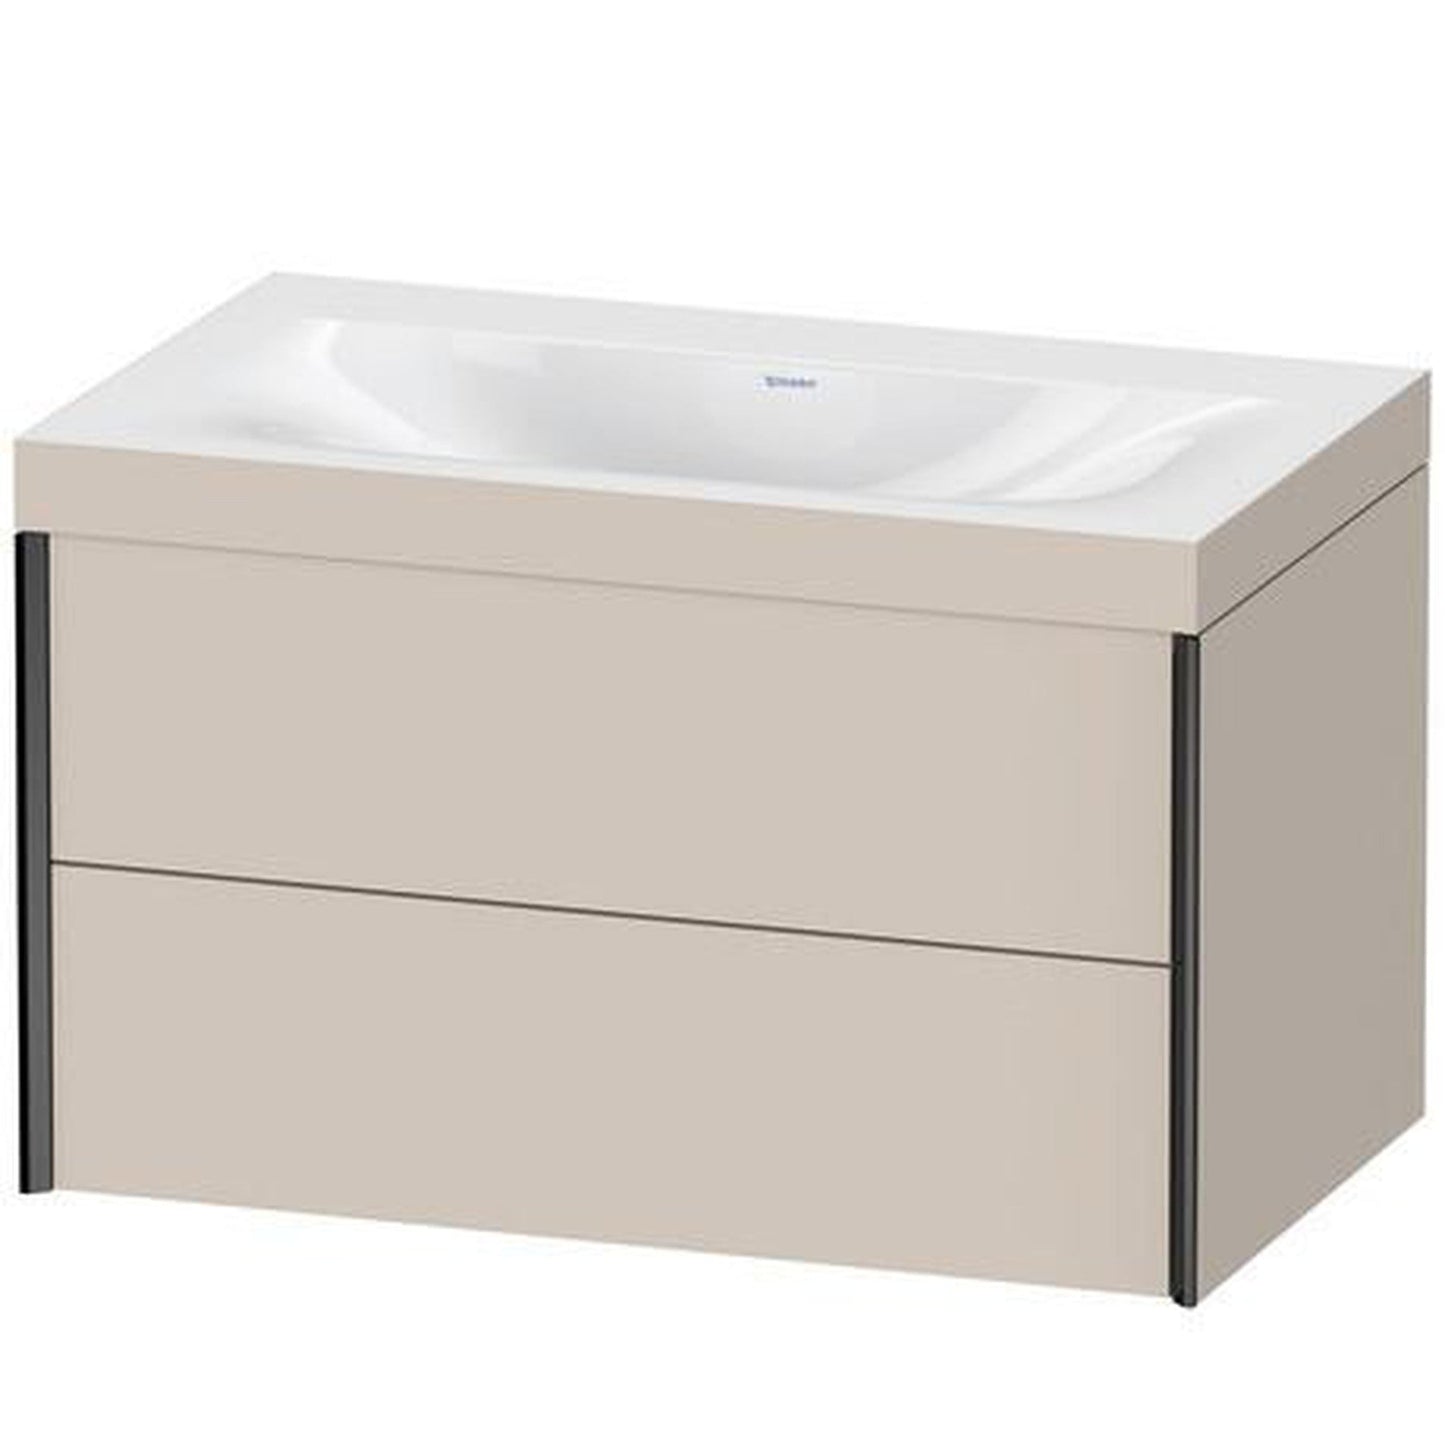 Duravit Xviu 31" x 20" x 19" Two Drawer C-Bonded Wall-Mount Vanity Kit Without Tap Hole, Taupe (XV4615NB291C)